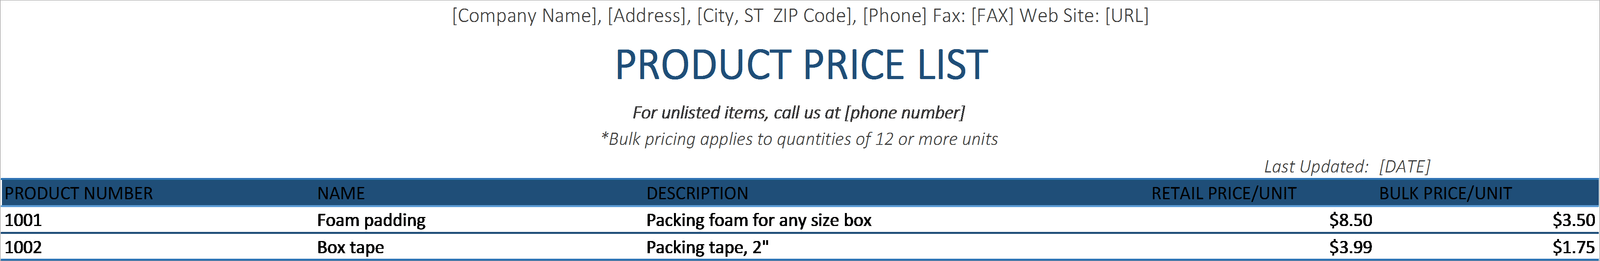 P04-Product Price List, Product Price List Excel, Financial Management, Using your money wisely, product price list, product price list excel